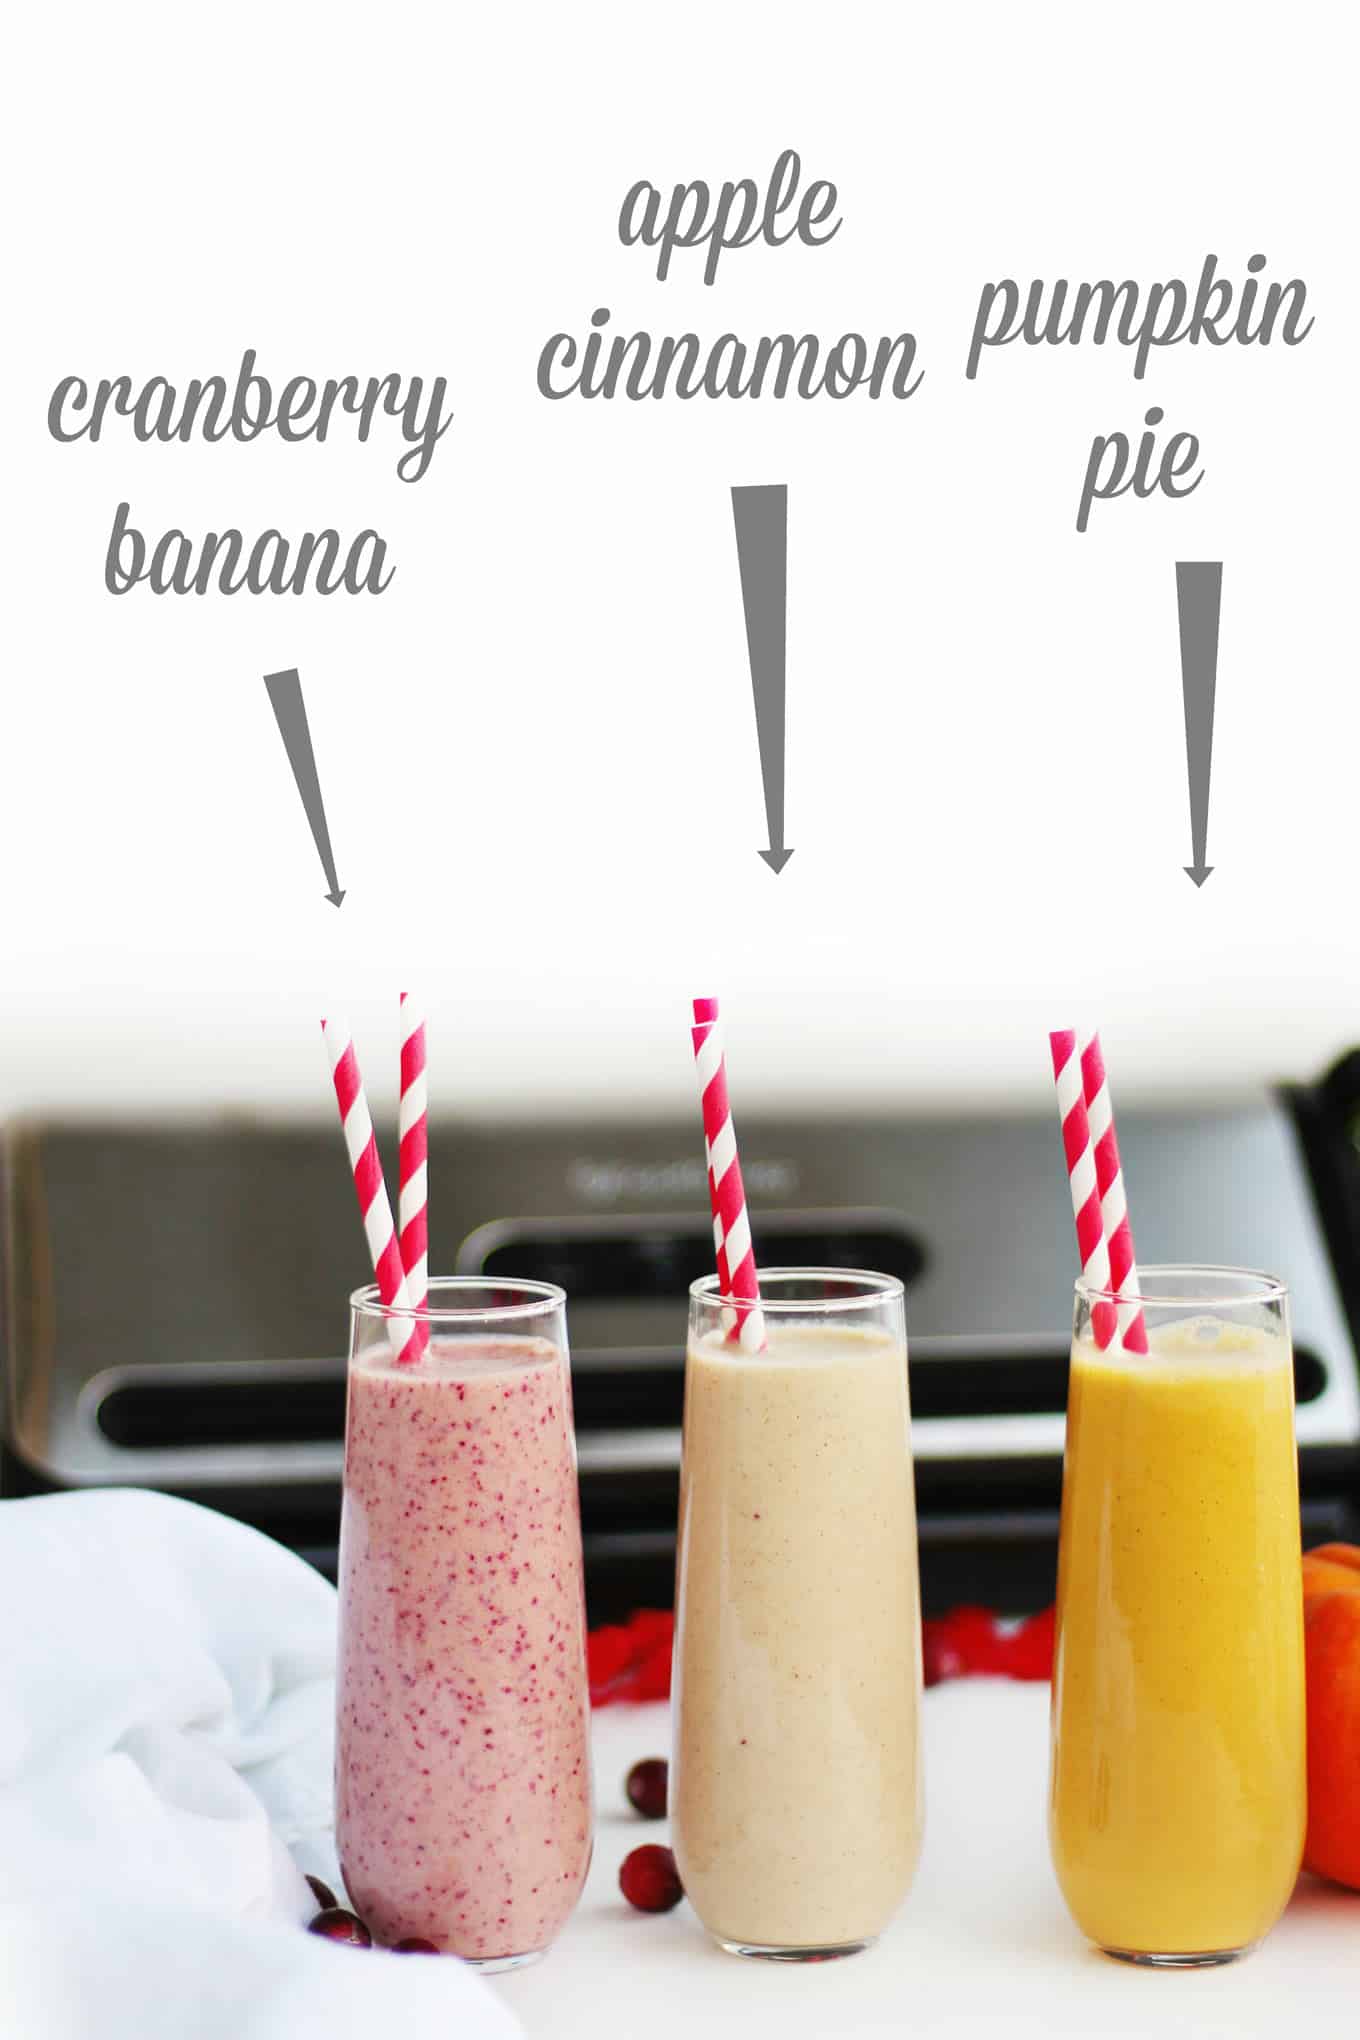 3 healthy, fresh fall freezer smoothie packs recipes! Save time and money by freezing your favorite seasonal produce into ready to make and serve smoothies. // Rhubarbarians // Cranberry yogurt smoothie recipe / Apple cinnamon smoothie recipe / Pumpkin pie smoothie recipe / Grab and go breakfast / Food saver / vacuum sealer / freezer meals / toddler kid friendly snack / #freezerpacks #fallsmoothies #rhubarbarians